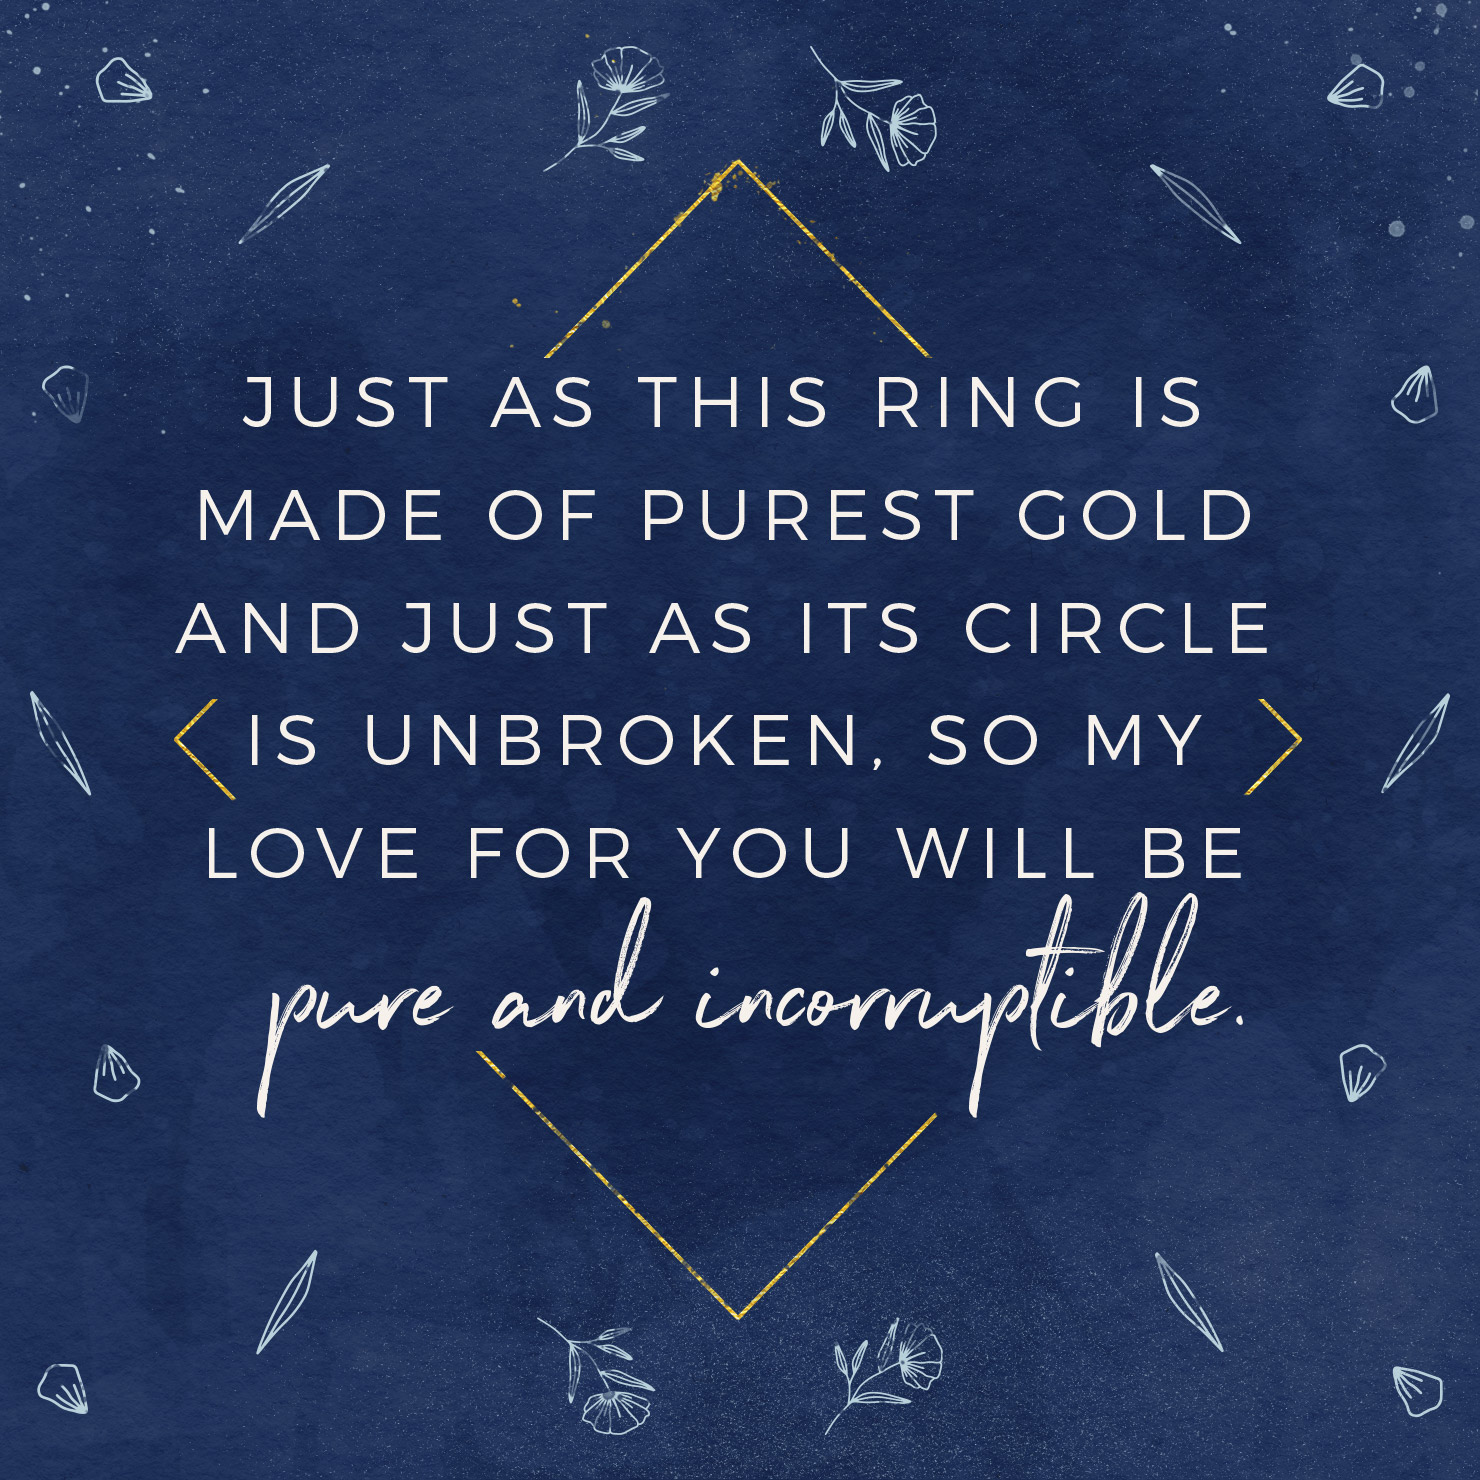 Just as this ring is made of purest gold and just as its circle is unbroken, so my love for you will be pure and incorruptible.